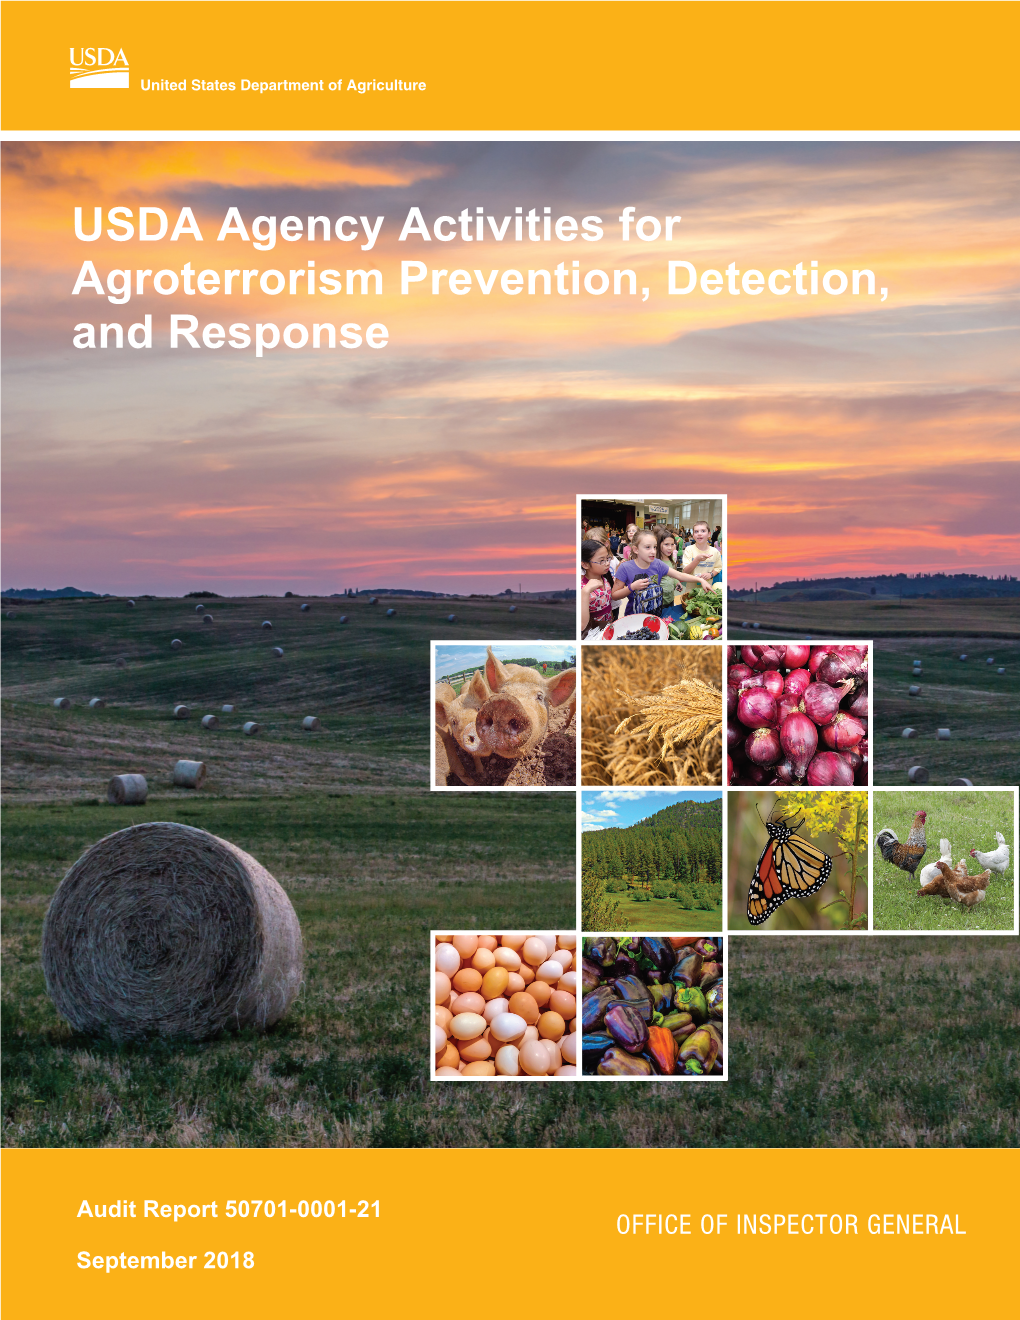 USDA Agency Activities for Agroterrorism Prevention, Detection, and Response